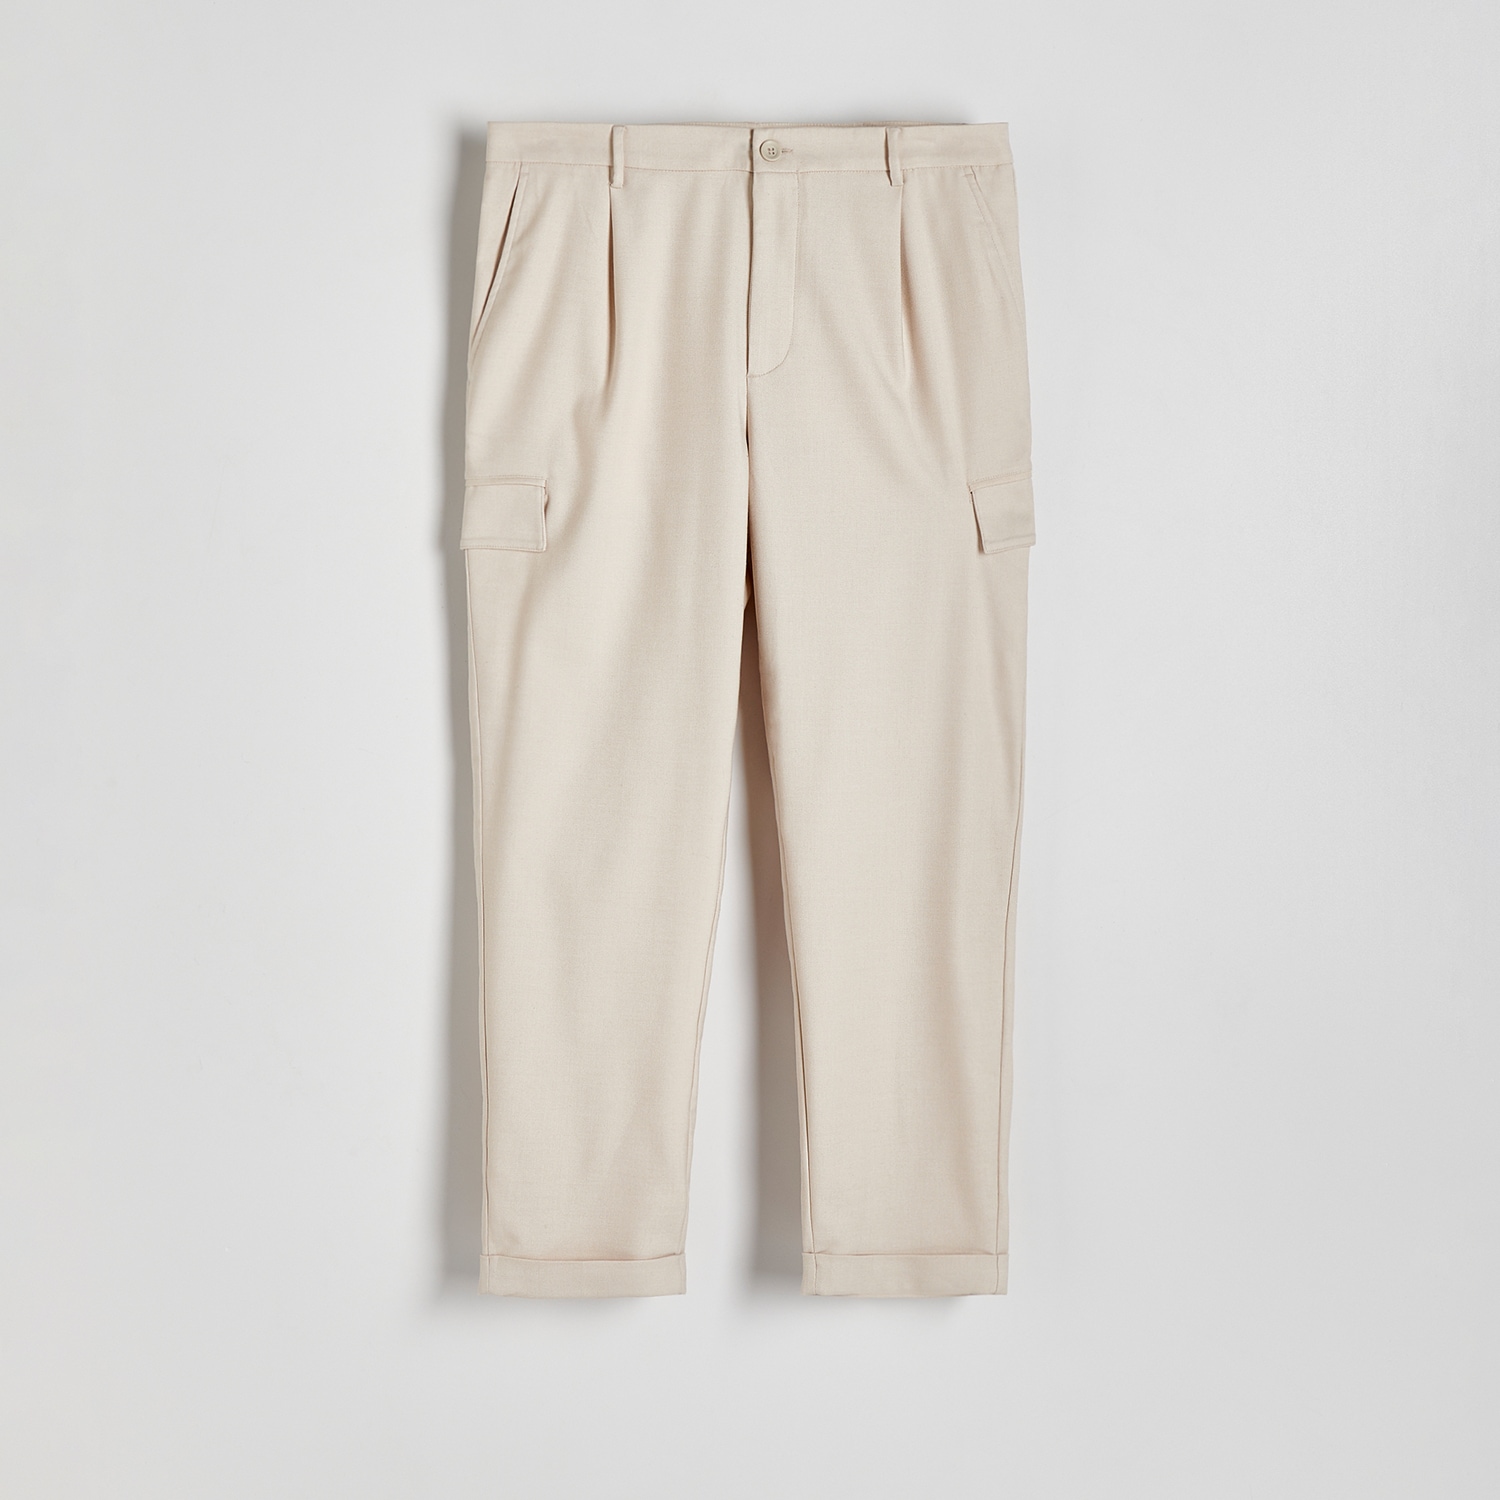 Reserved - Men`s trousers - Ivory